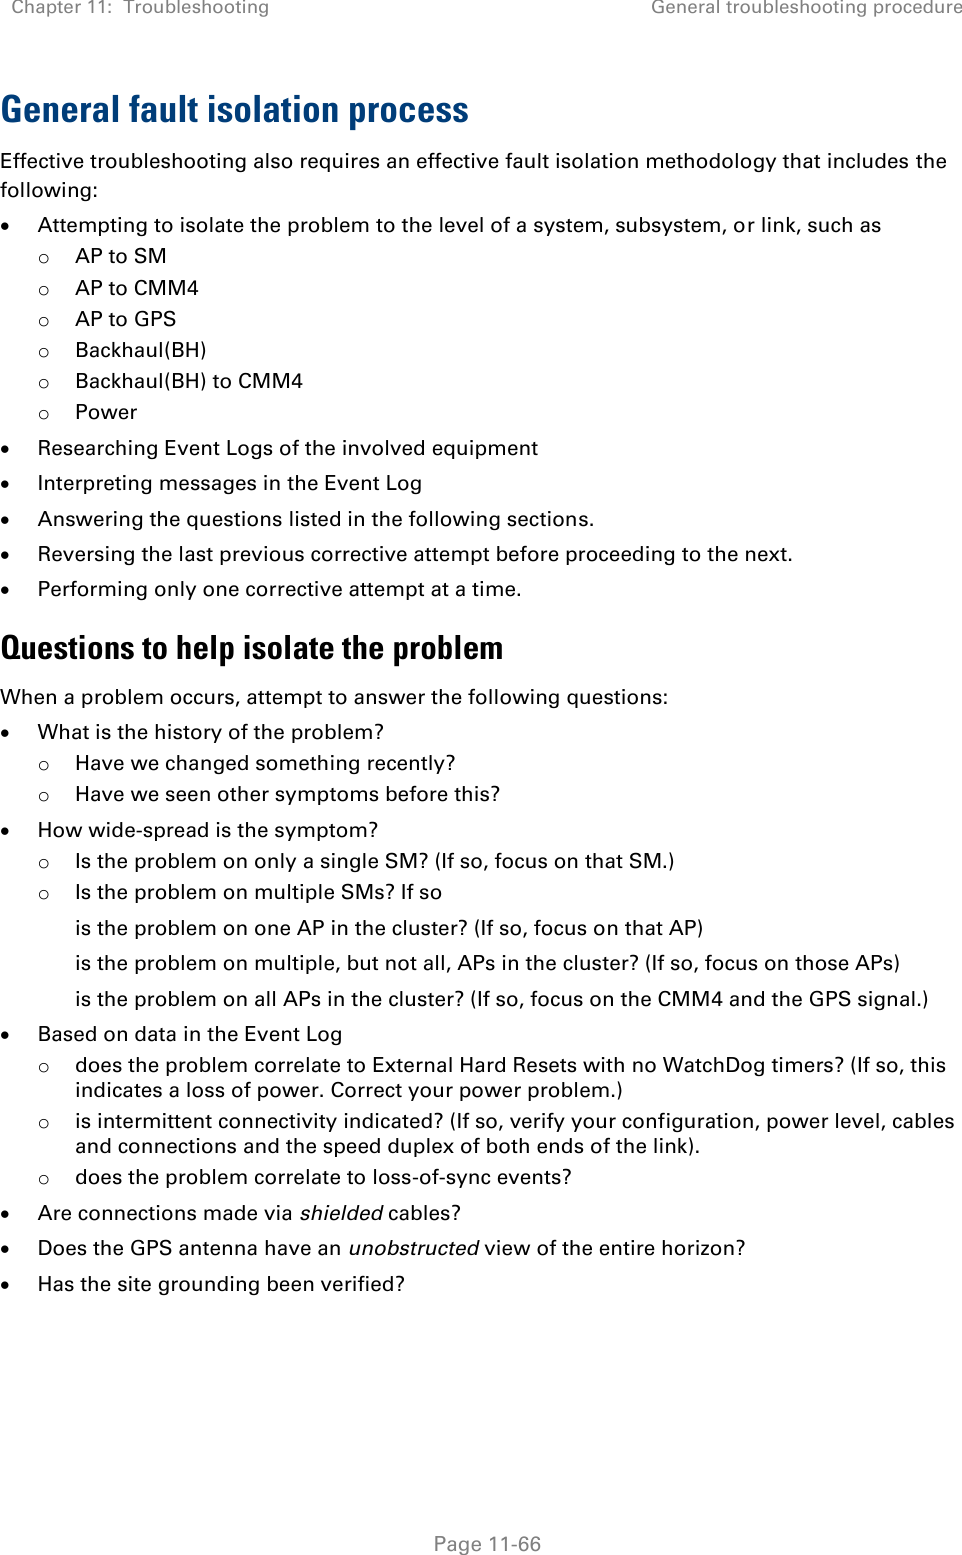 Chapter 11:  Troubleshooting General troubleshooting procedure   Page 11-66 General fault isolation process Effective troubleshooting also requires an effective fault isolation methodology that includes the following:  Attempting to isolate the problem to the level of a system, subsystem, or link, such as o AP to SM o AP to CMM4 o AP to GPS o Backhaul(BH) o Backhaul(BH) to CMM4 o Power  Researching Event Logs of the involved equipment   Interpreting messages in the Event Log  Answering the questions listed in the following sections.  Reversing the last previous corrective attempt before proceeding to the next.  Performing only one corrective attempt at a time. Questions to help isolate the problem When a problem occurs, attempt to answer the following questions:  What is the history of the problem? o Have we changed something recently? o Have we seen other symptoms before this?  How wide-spread is the symptom?  o Is the problem on only a single SM? (If so, focus on that SM.) o Is the problem on multiple SMs? If so is the problem on one AP in the cluster? (If so, focus on that AP) is the problem on multiple, but not all, APs in the cluster? (If so, focus on those APs) is the problem on all APs in the cluster? (If so, focus on the CMM4 and the GPS signal.)  Based on data in the Event Log  o does the problem correlate to External Hard Resets with no WatchDog timers? (If so, this indicates a loss of power. Correct your power problem.) o is intermittent connectivity indicated? (If so, verify your configuration, power level, cables and connections and the speed duplex of both ends of the link). o does the problem correlate to loss-of-sync events?  Are connections made via shielded cables?  Does the GPS antenna have an unobstructed view of the entire horizon?  Has the site grounding been verified?   